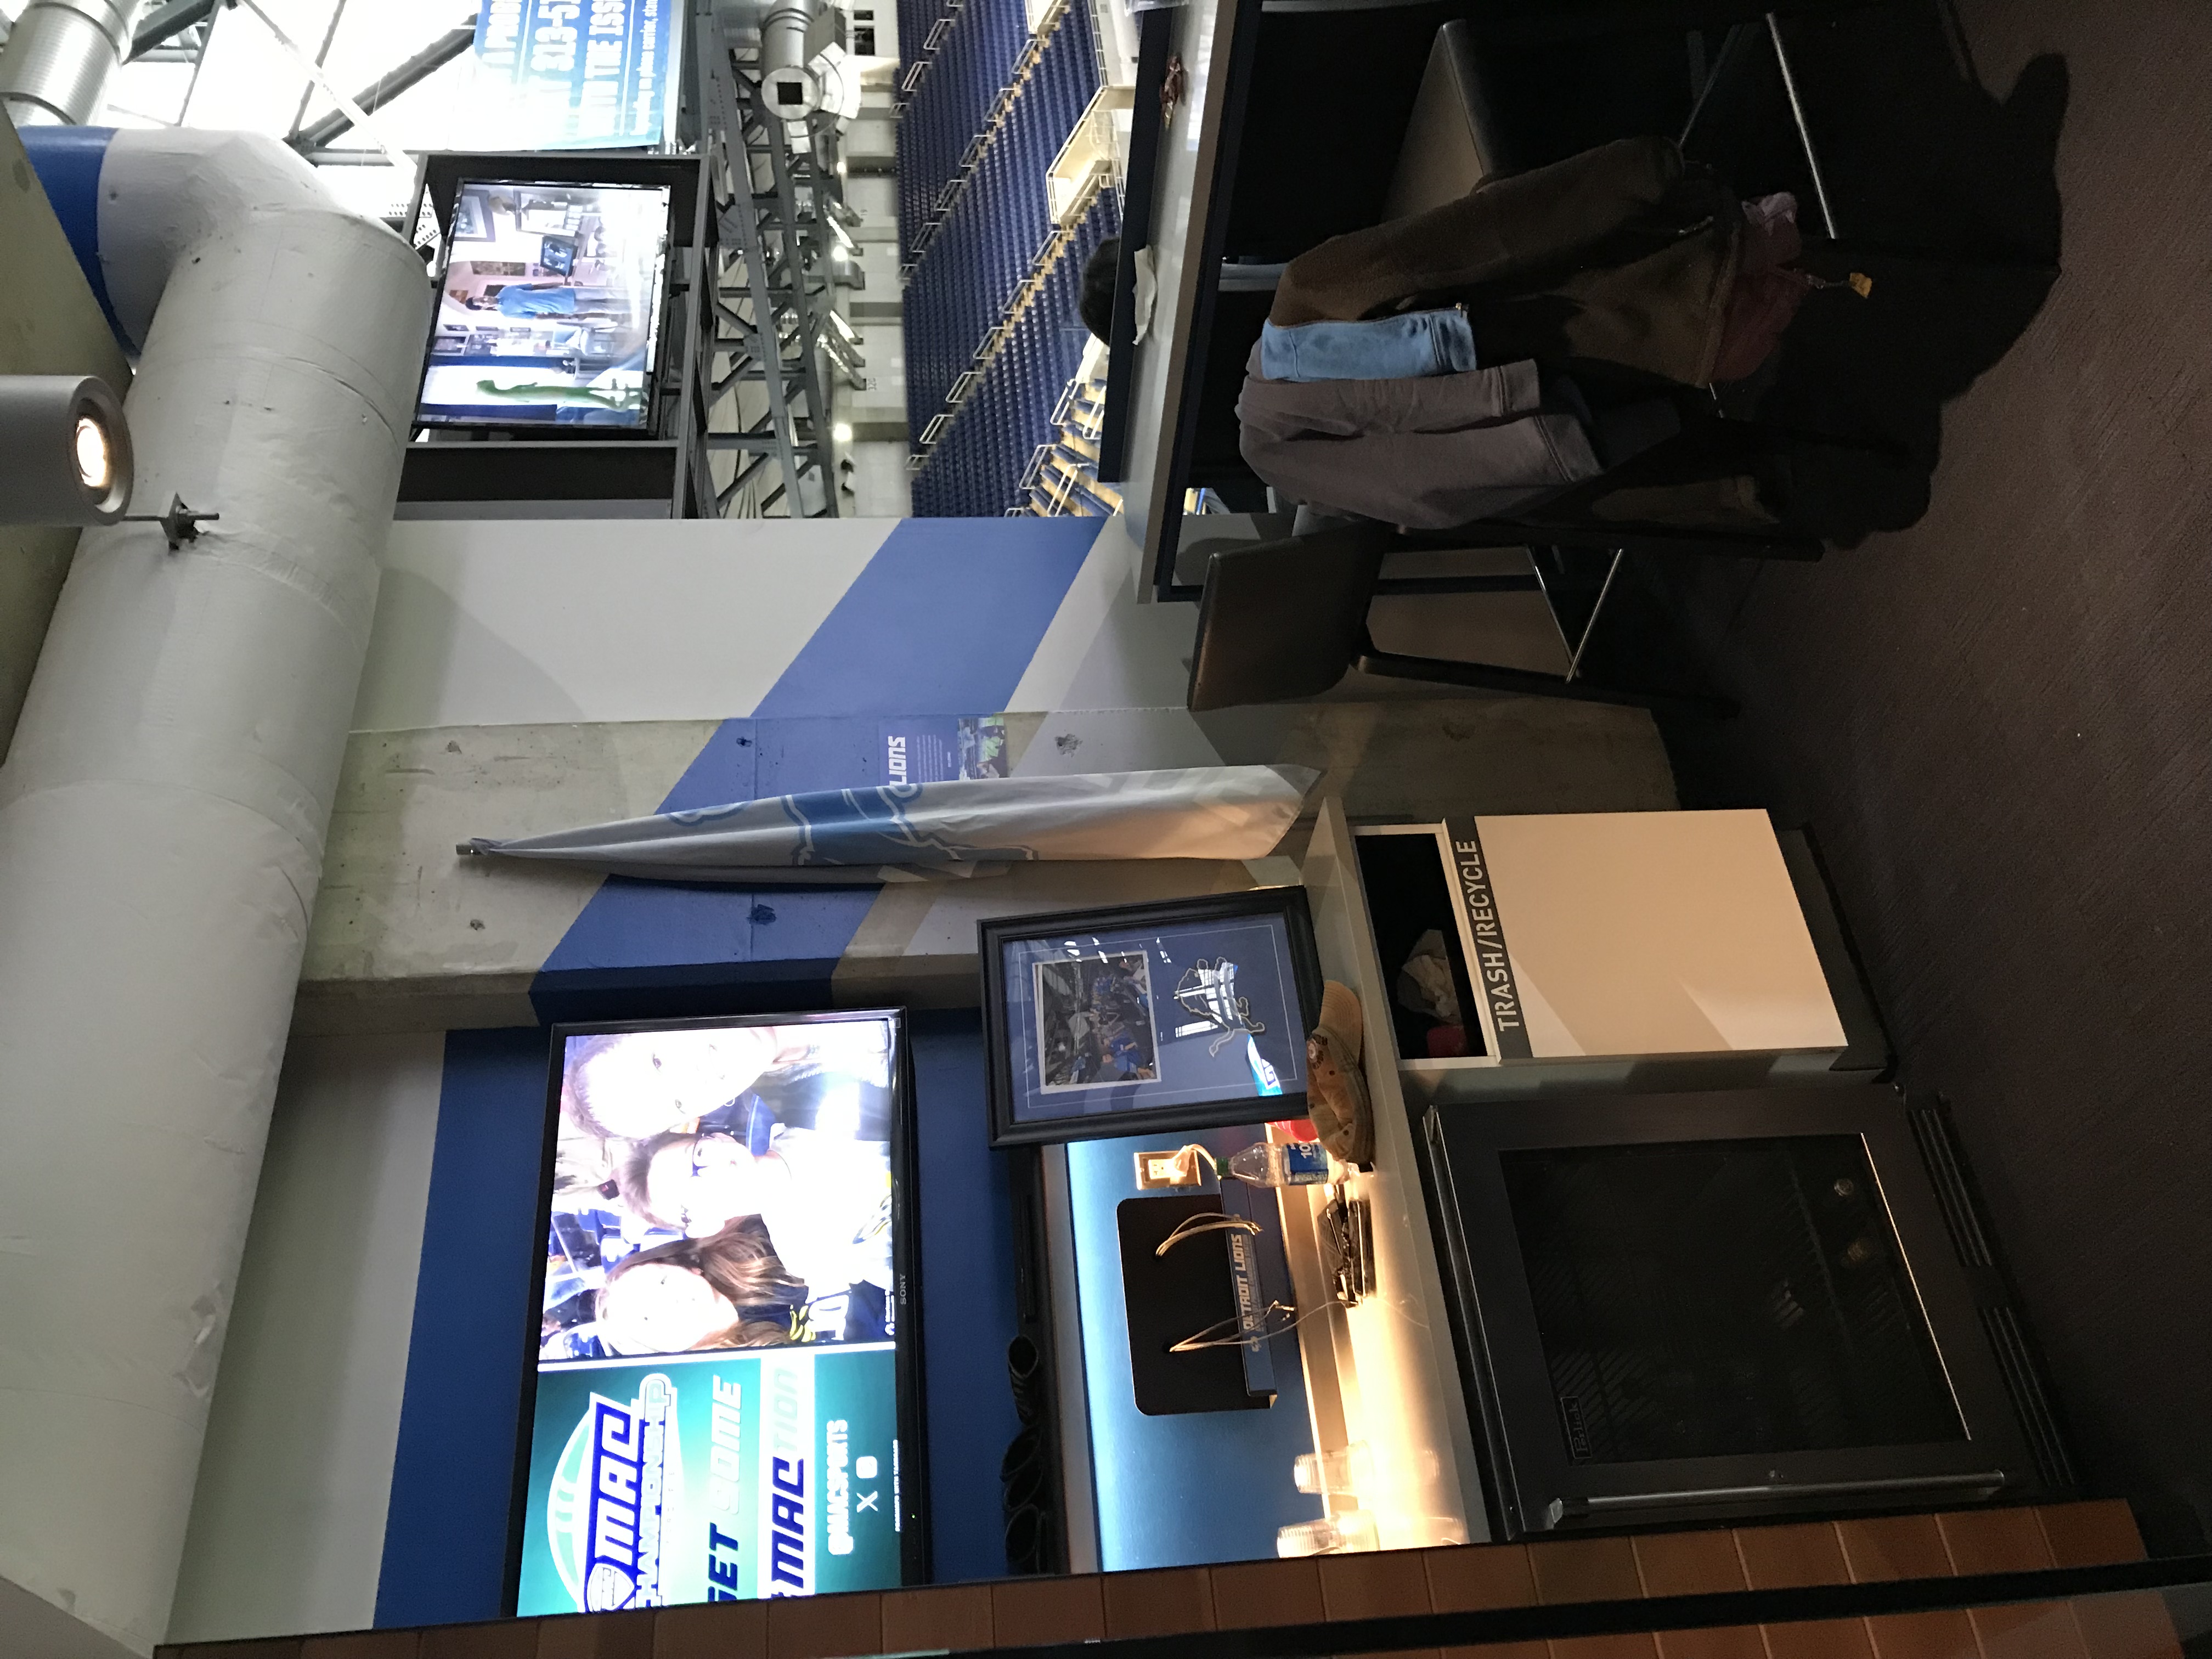 image of the Terrace Suites at Ford Field, showing how suites are setup with two TV screens